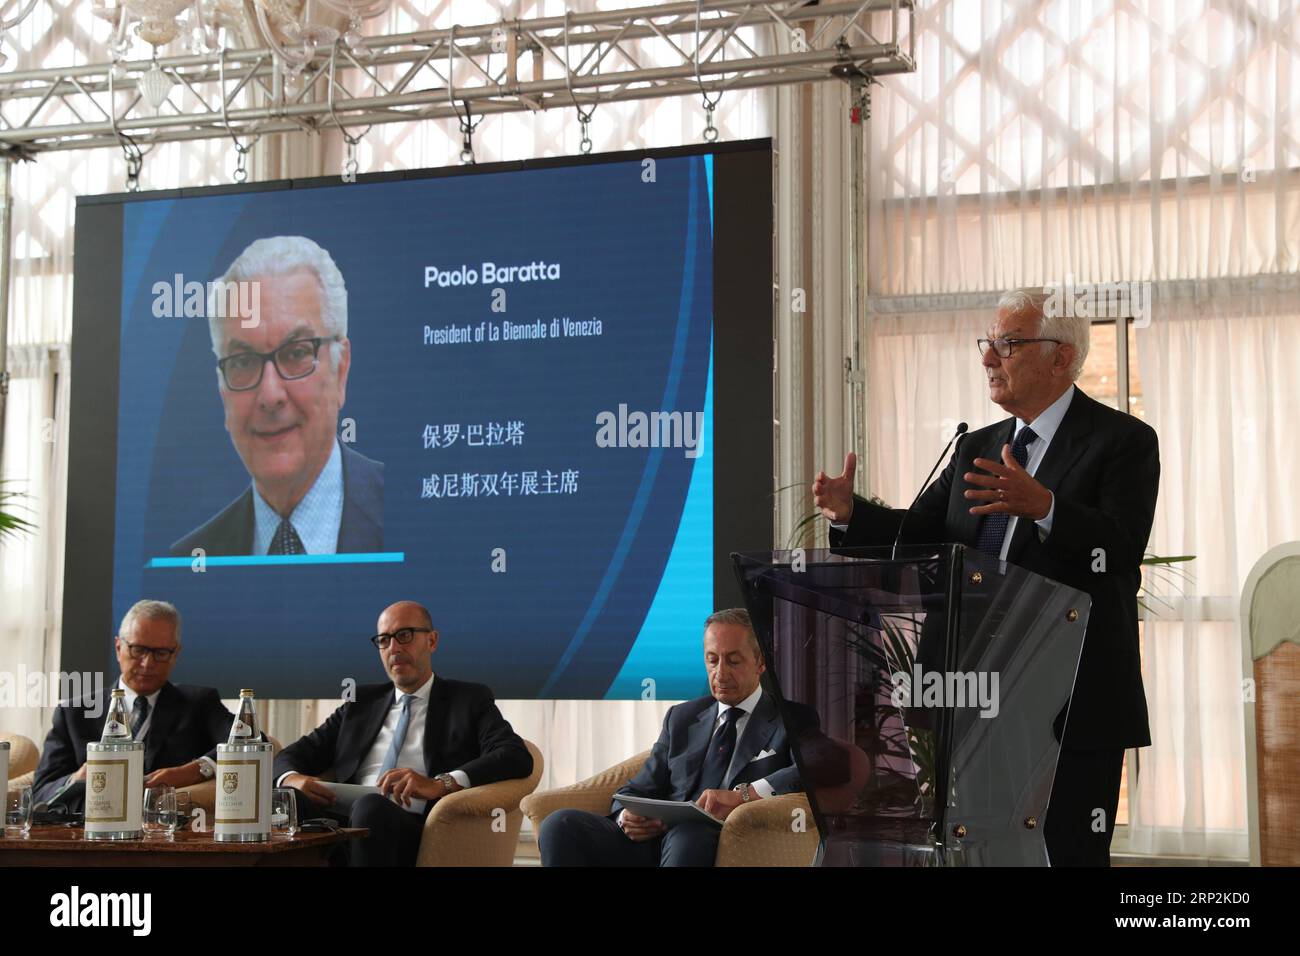 (180906) -- VENICE, Sept. 6, 2018 -- Paolo Baratta, president of La Biennale di Venezia, addresses the Sino-Italian Co-Production Forum in Venice, Italy, Sept. 1, 2018. Italian filmmakers and producers should join forces with China, where audiences are growing and the market is booming, film industry professionals said at the Sino-Italian Co-Production Forum held on Saturday at the Venice Film Festival. ) (wtc) ITALY-VENICE-SINO-ITALIAN CO-PRODUCTION FORUM ChengxTingting PUBLICATIONxNOTxINxCHN Stock Photo